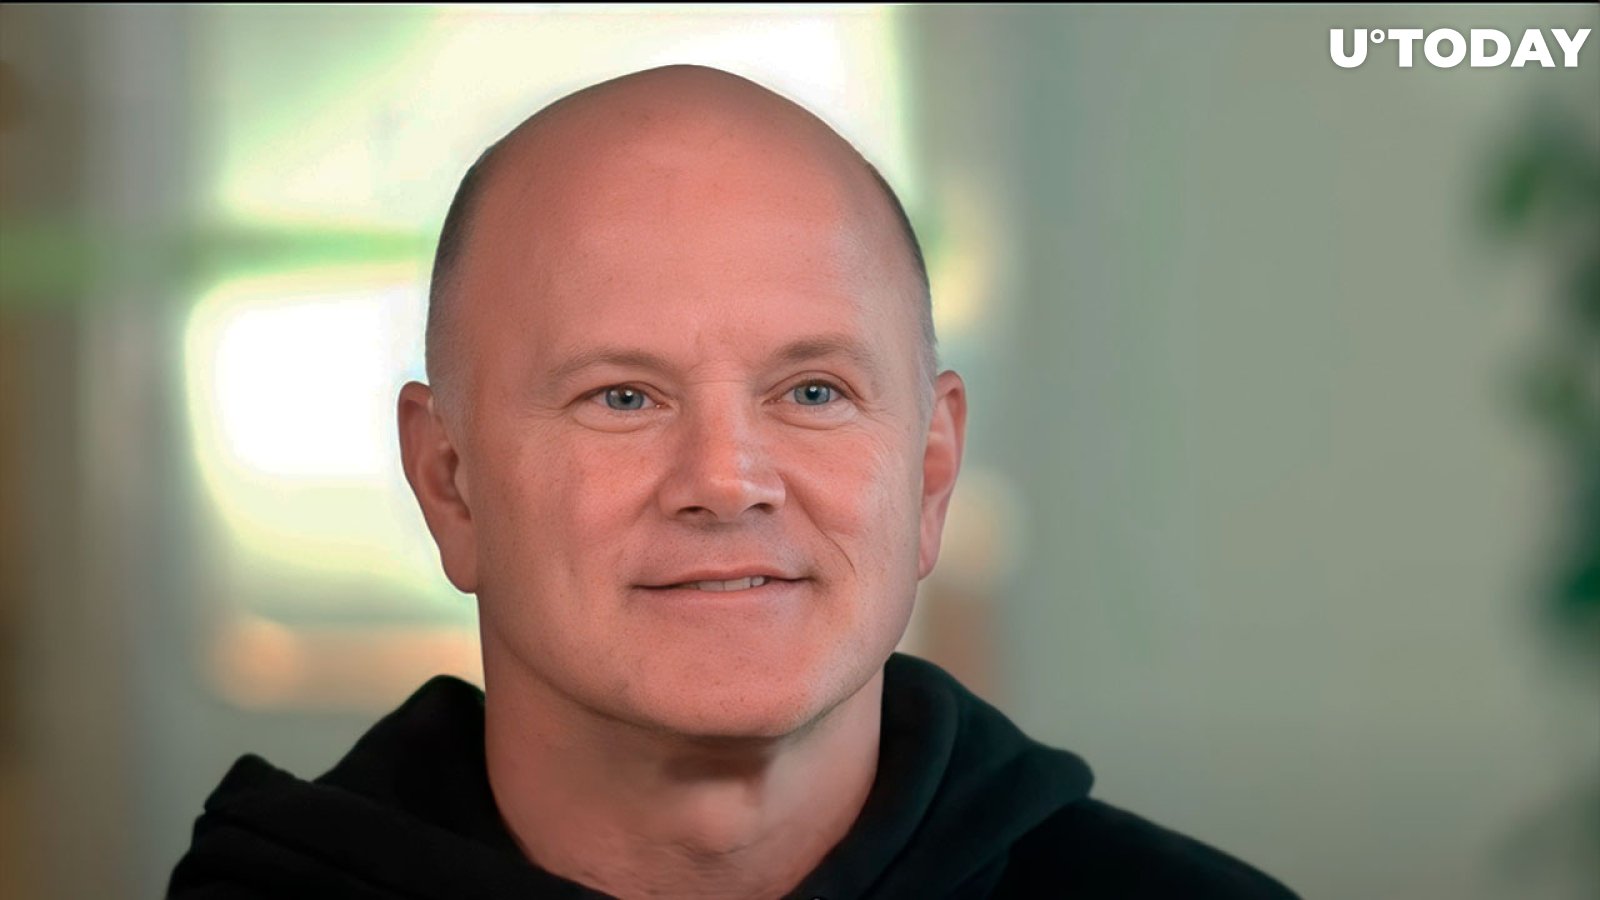 Mike Novogratz on Crypto Prices: "Of Course, We Could Go Lower"